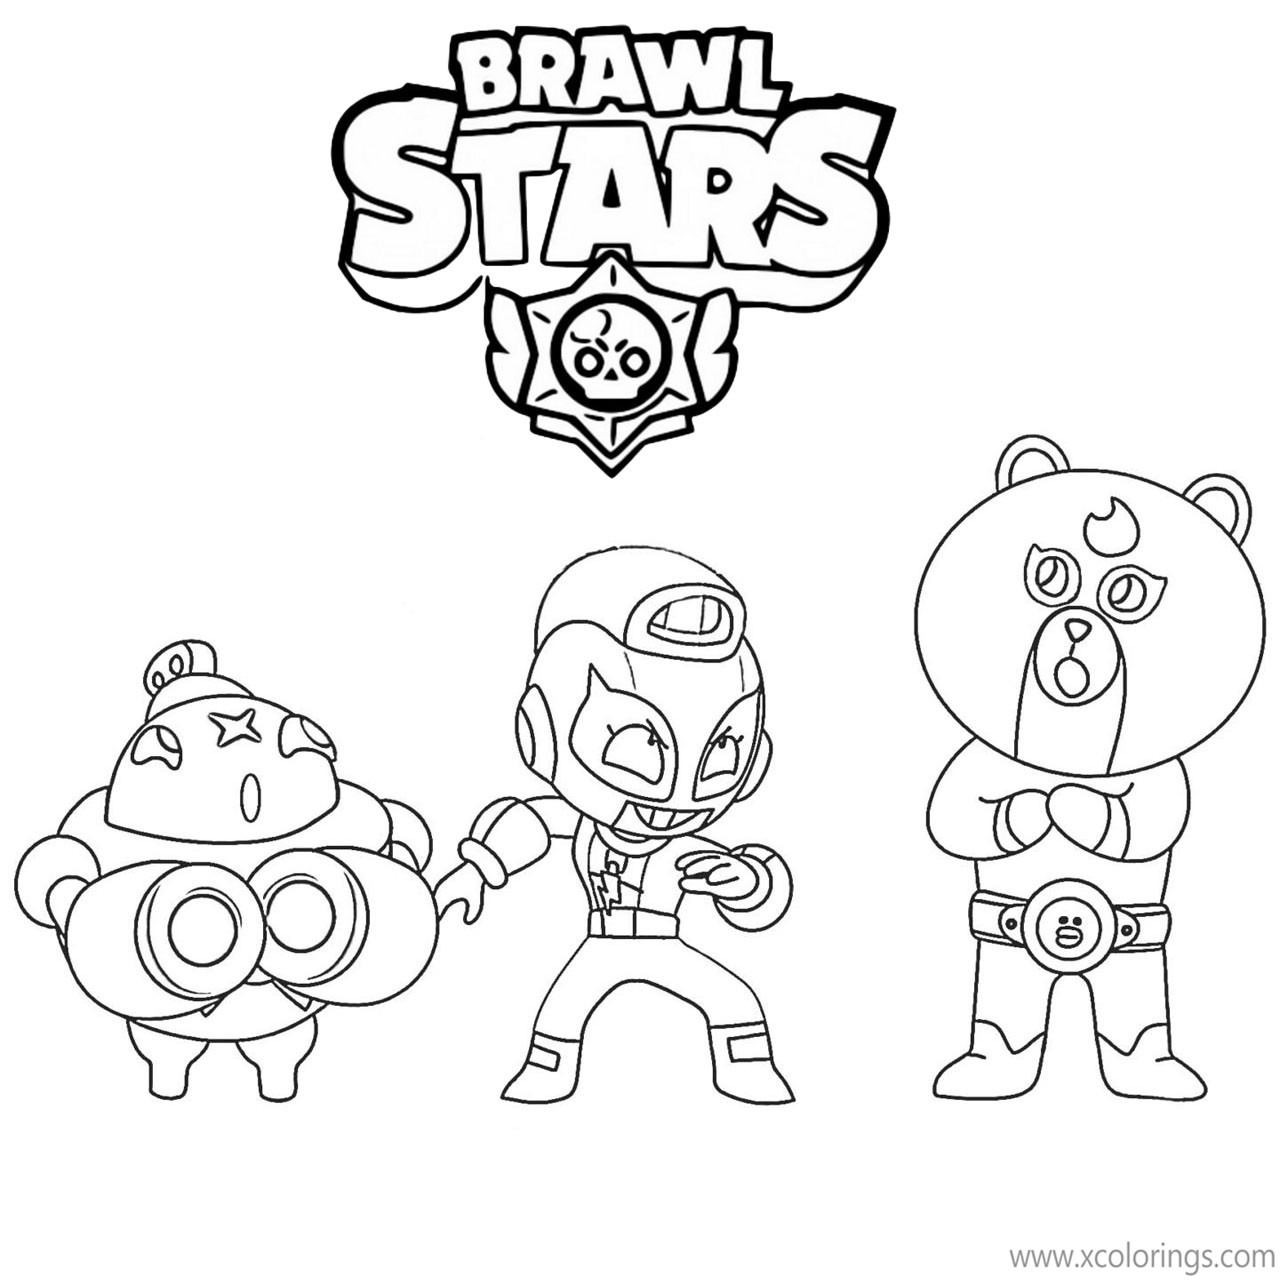 Free Max Brawl Stars Coloring Pages Max with  printable